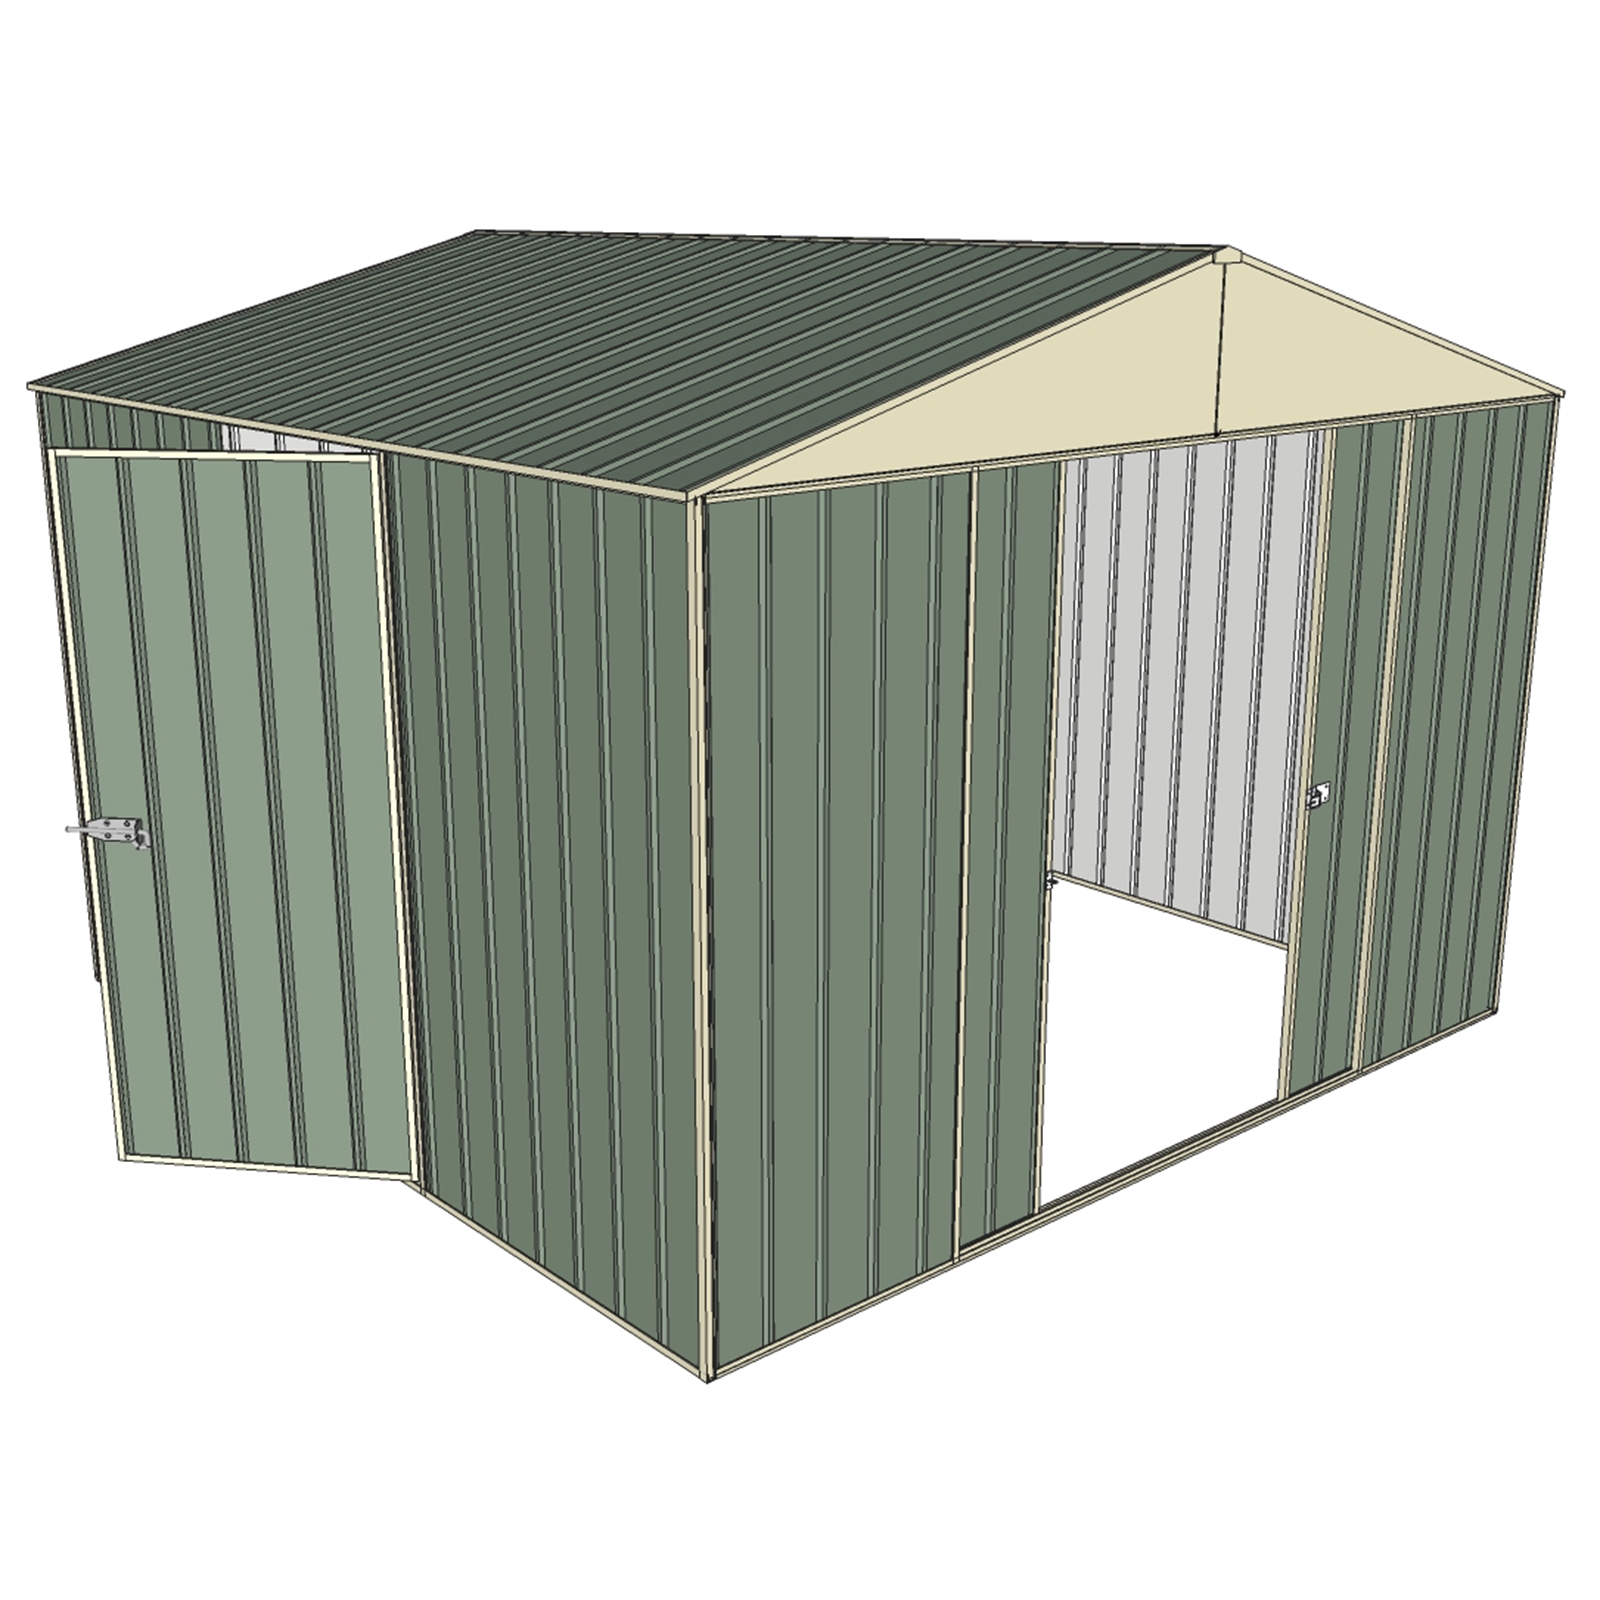 Build-a-Shed 3.0 x 2.3 x 3.0m Green Double Sliding and Single Hinge Door Shed